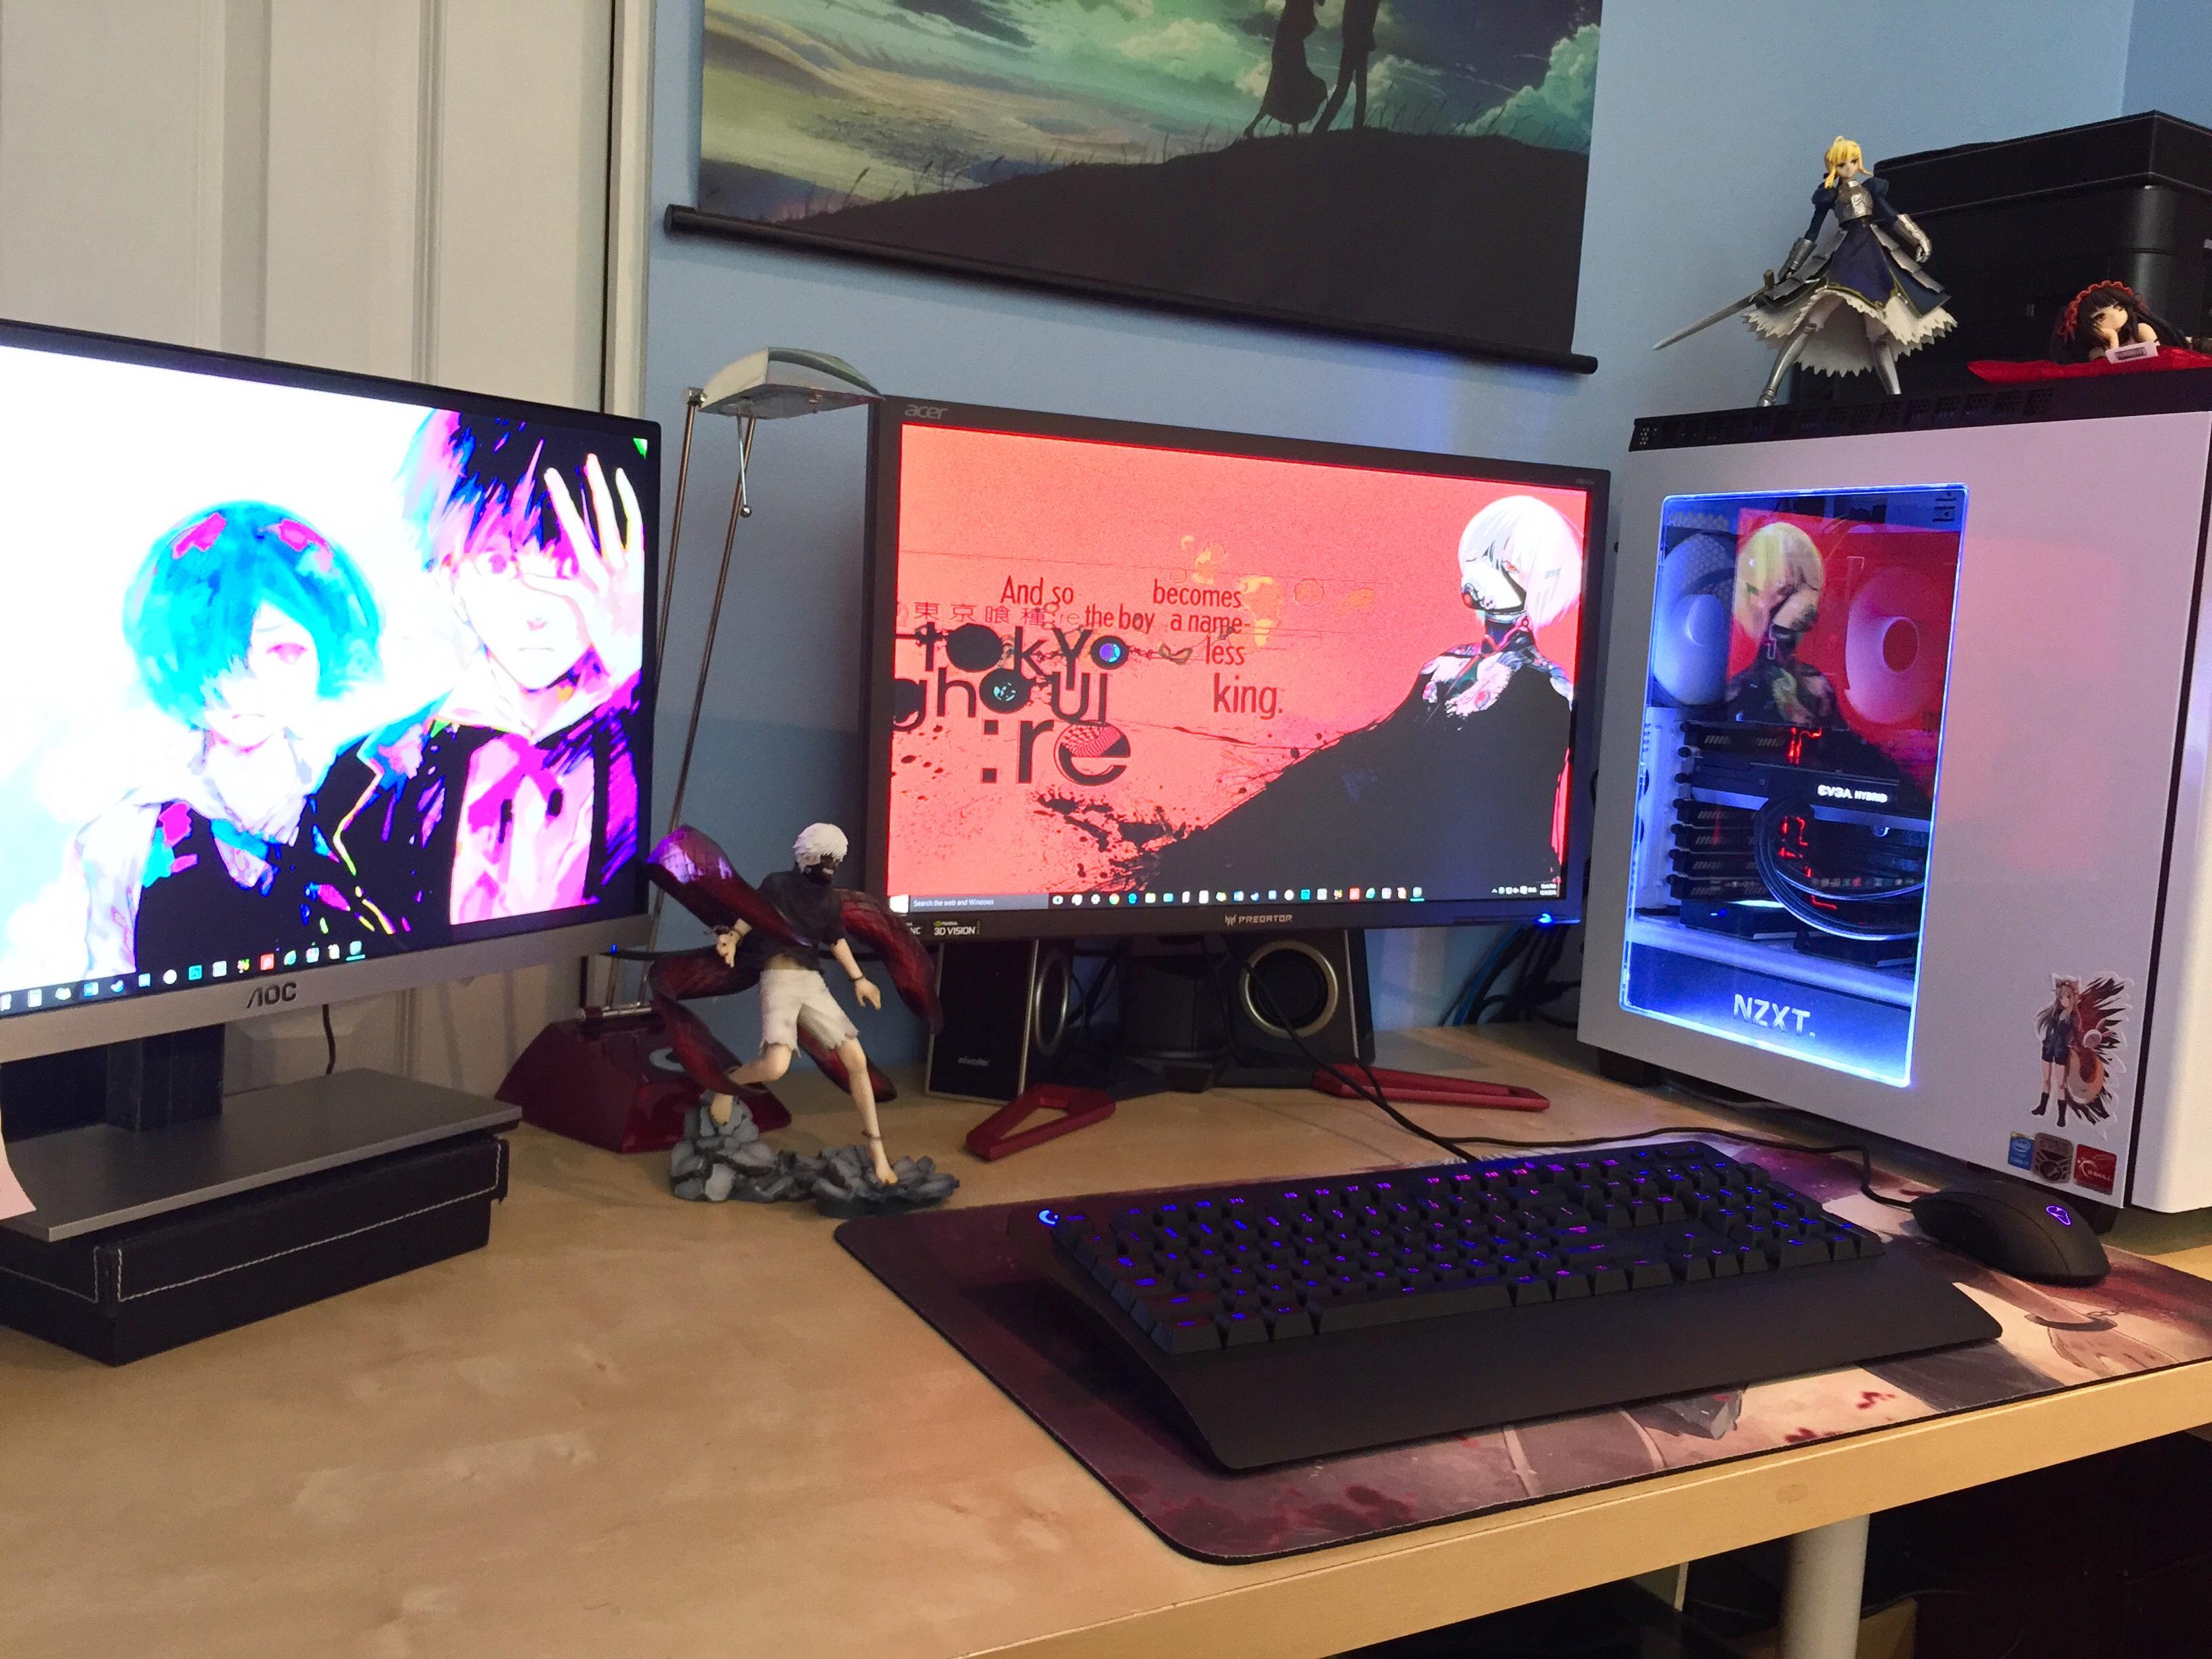 My Tokyo Ghoul Themed PC